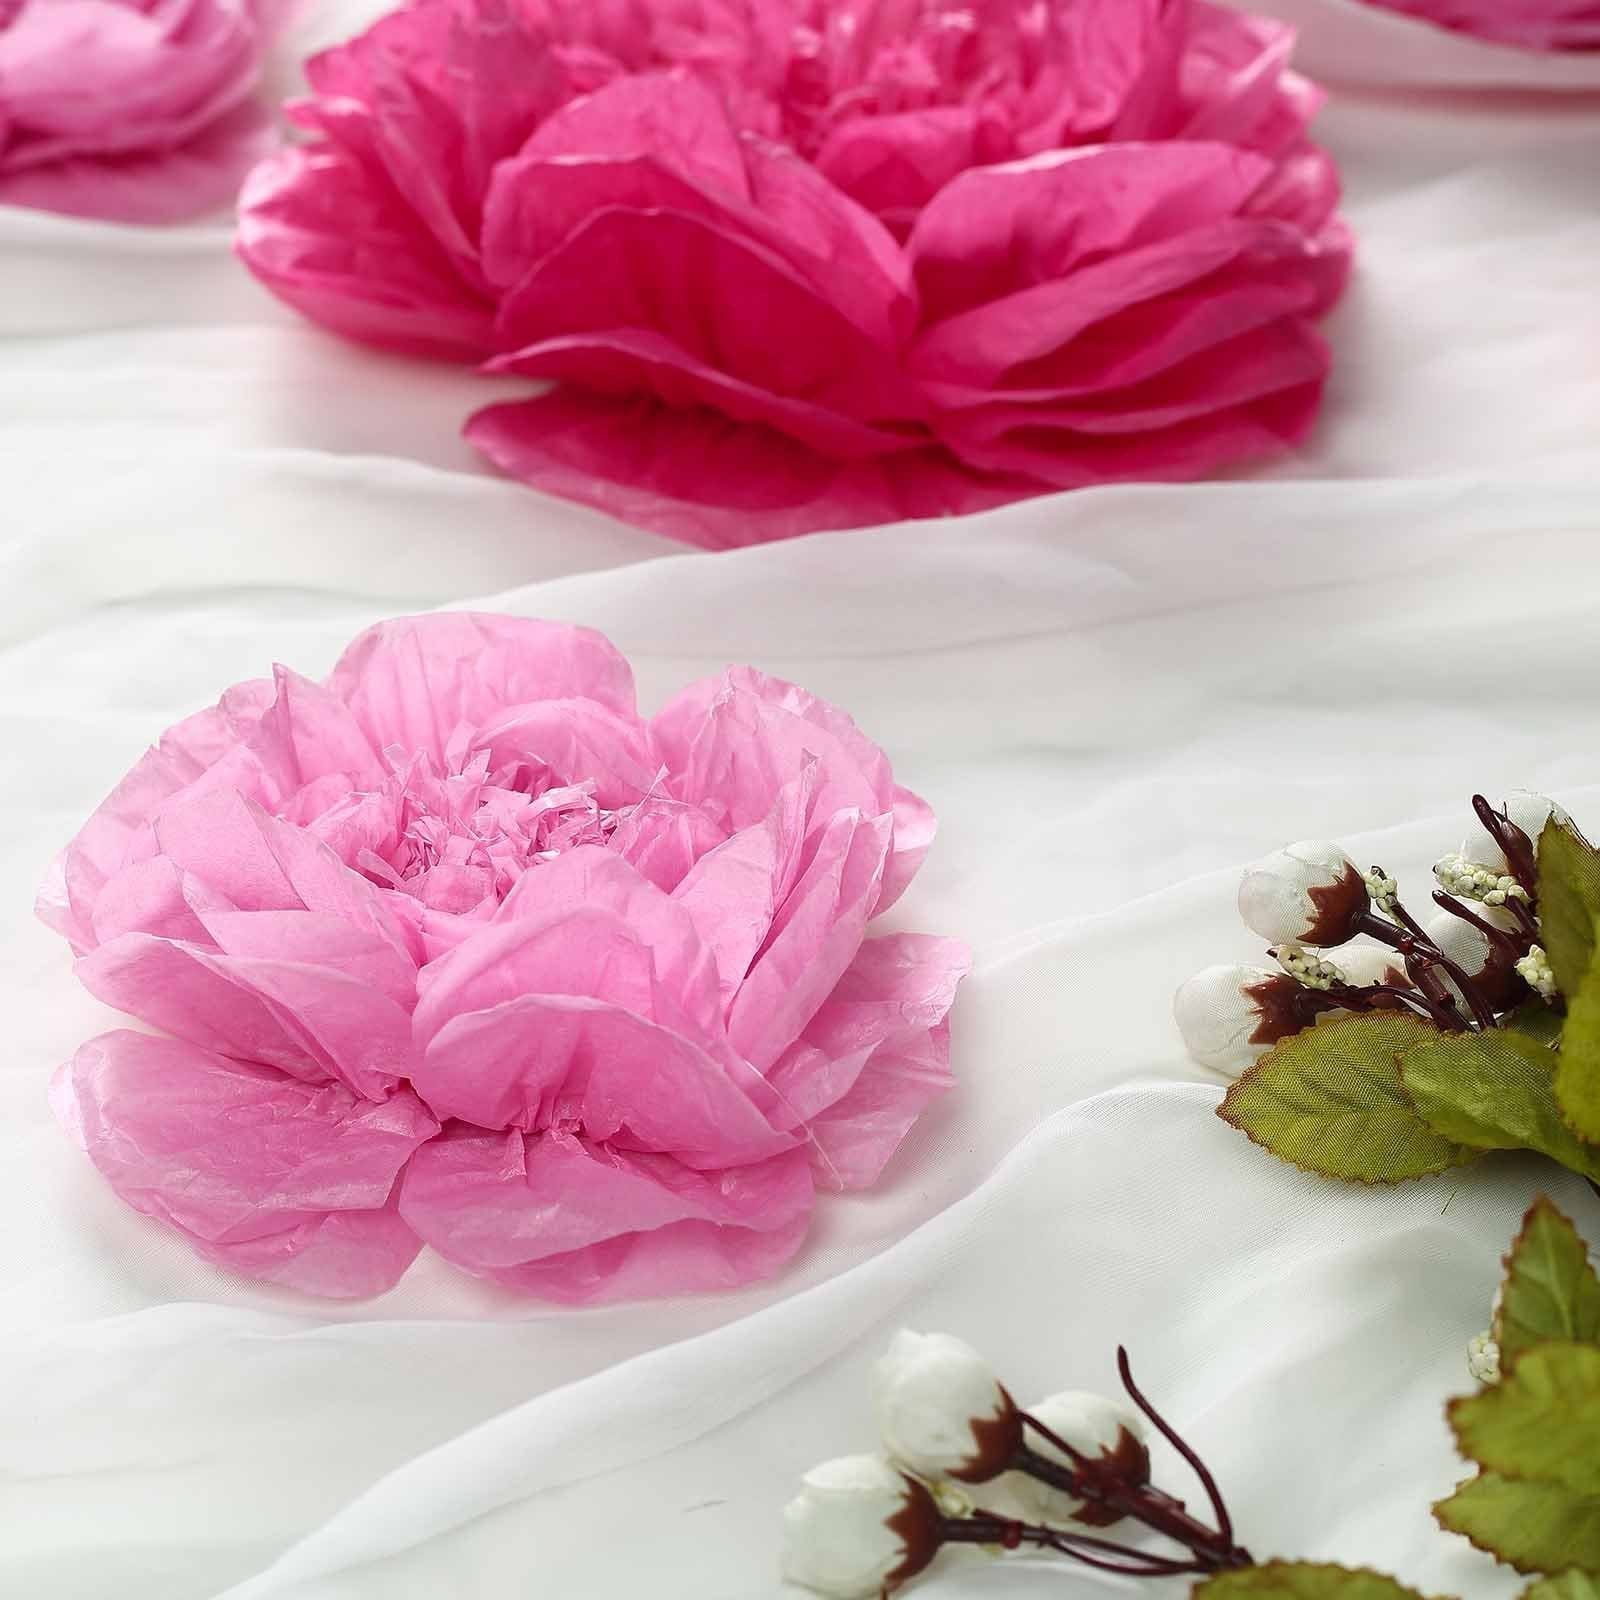 6 pcs 12 in 16 in 20 in Paper Peony Tissue Flowers